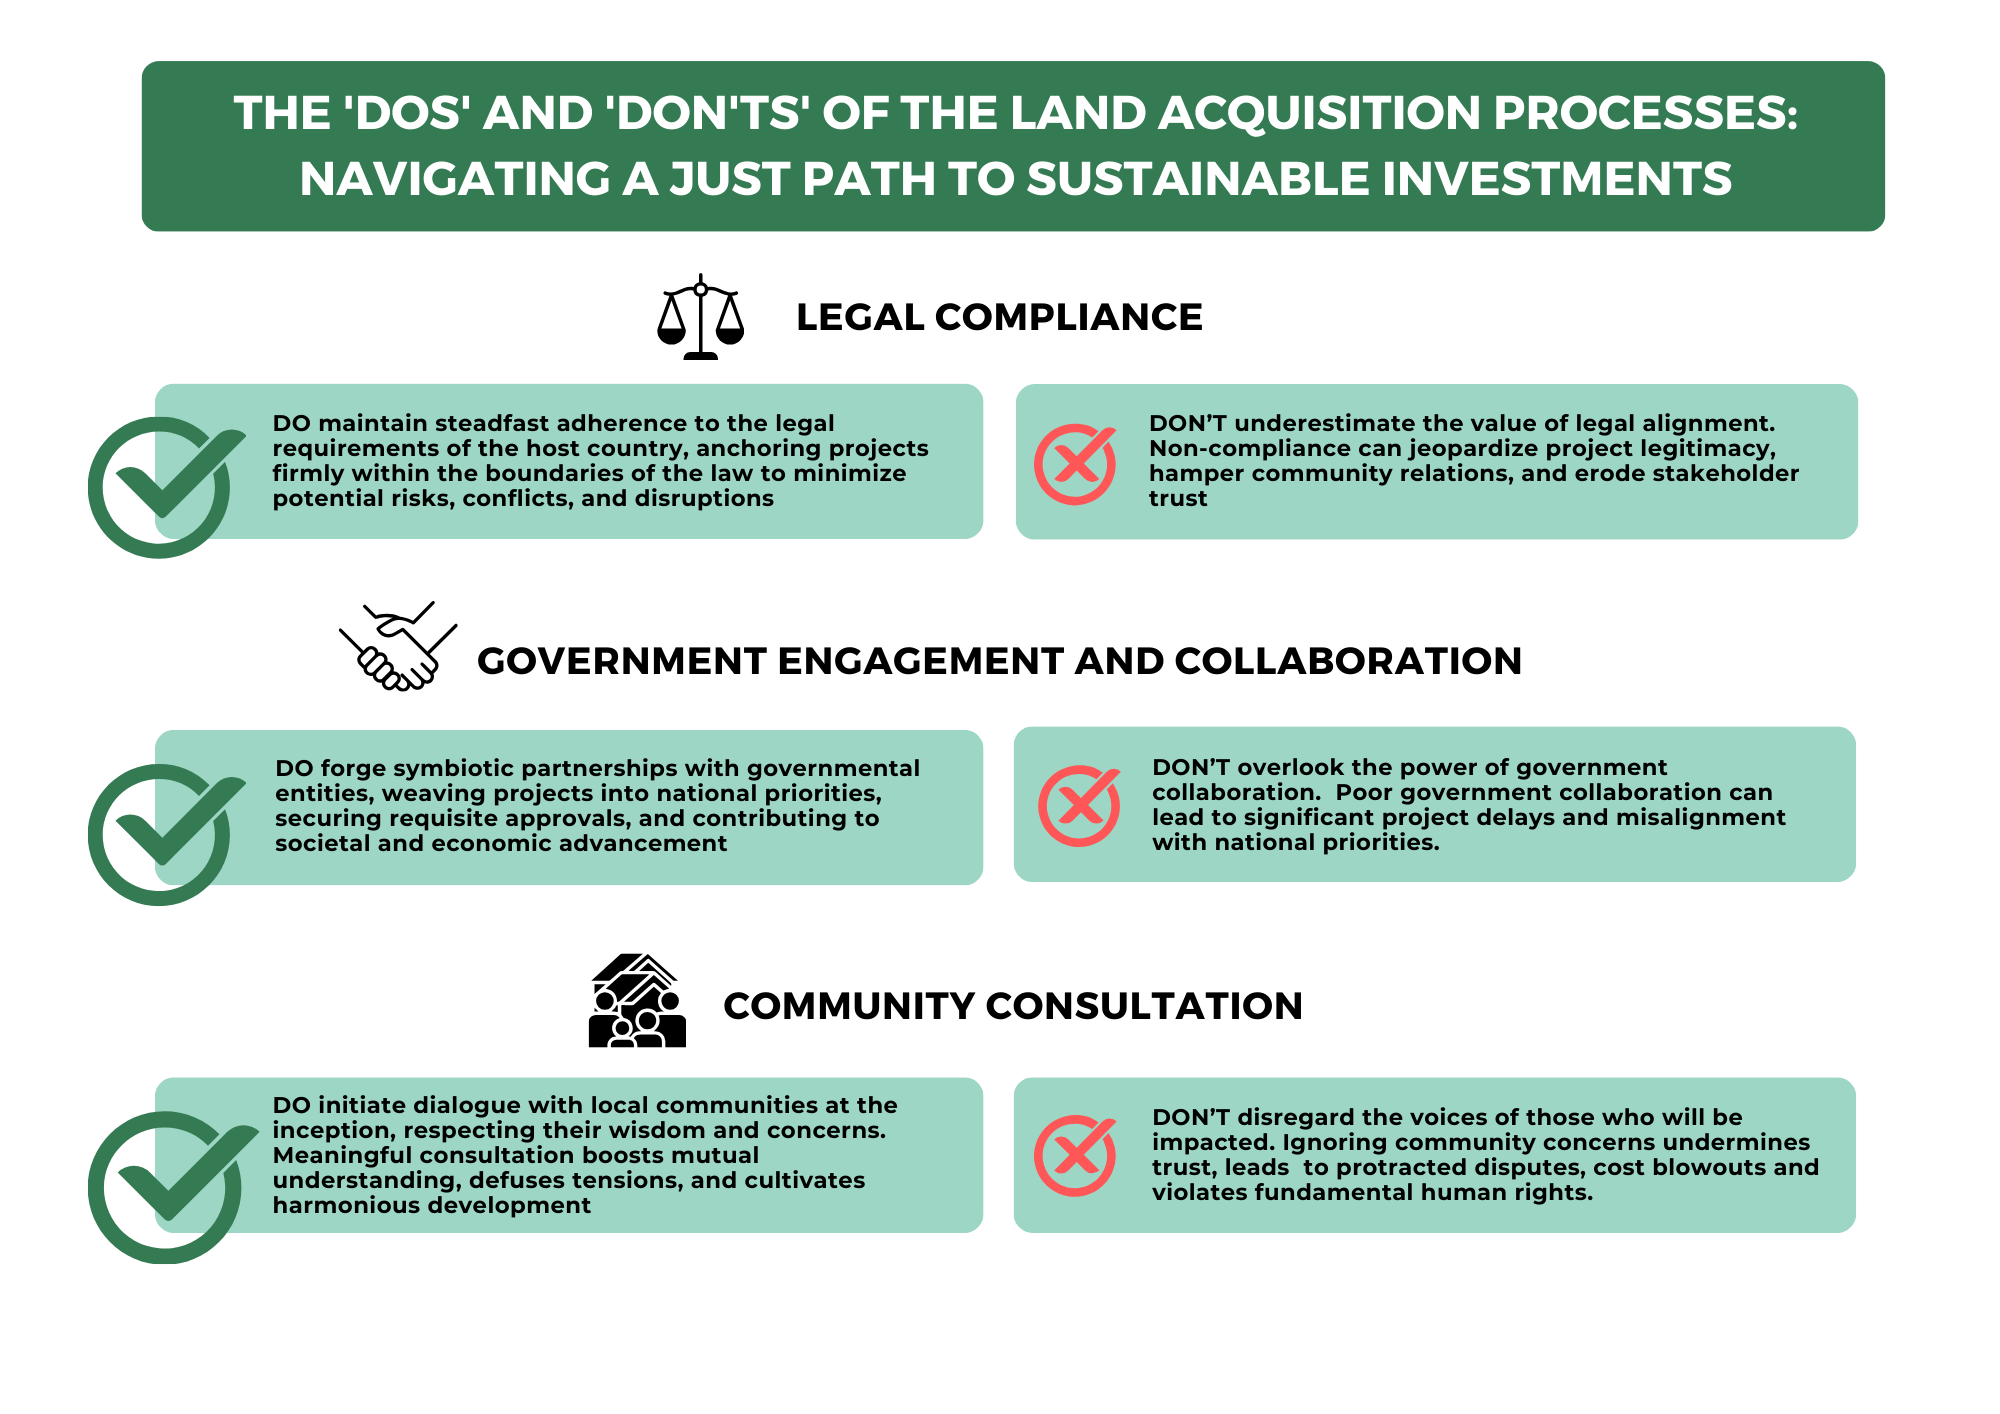 Our Land Thoughts – The ‘DOS’ and ‘DON’TS’ of the land acquisition processes: navigating a just path to sustainable investments